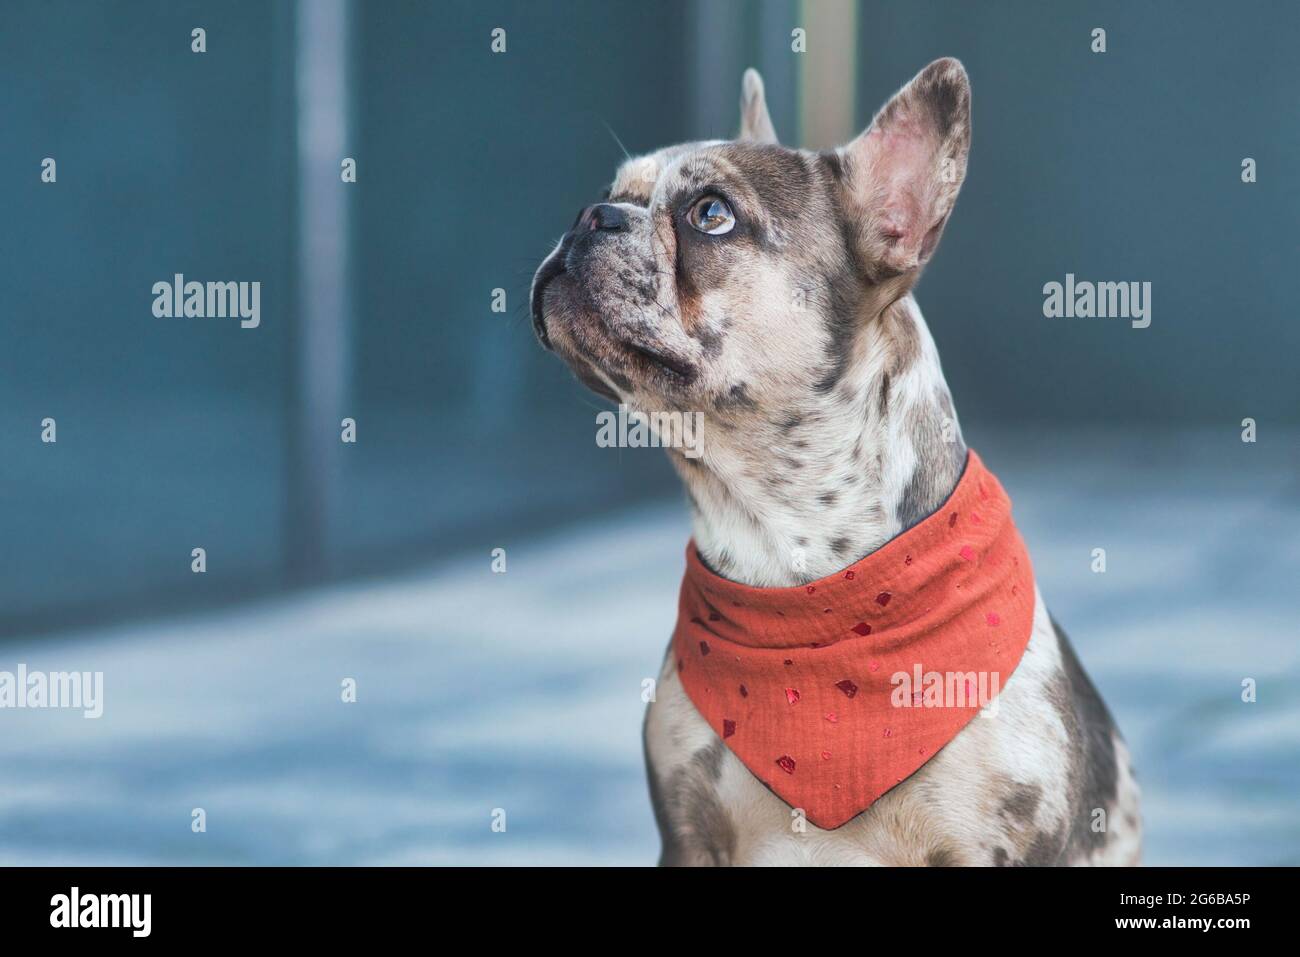 Merle colored French Bulldog dog wearing red neckerchief with copy space Stock Photo